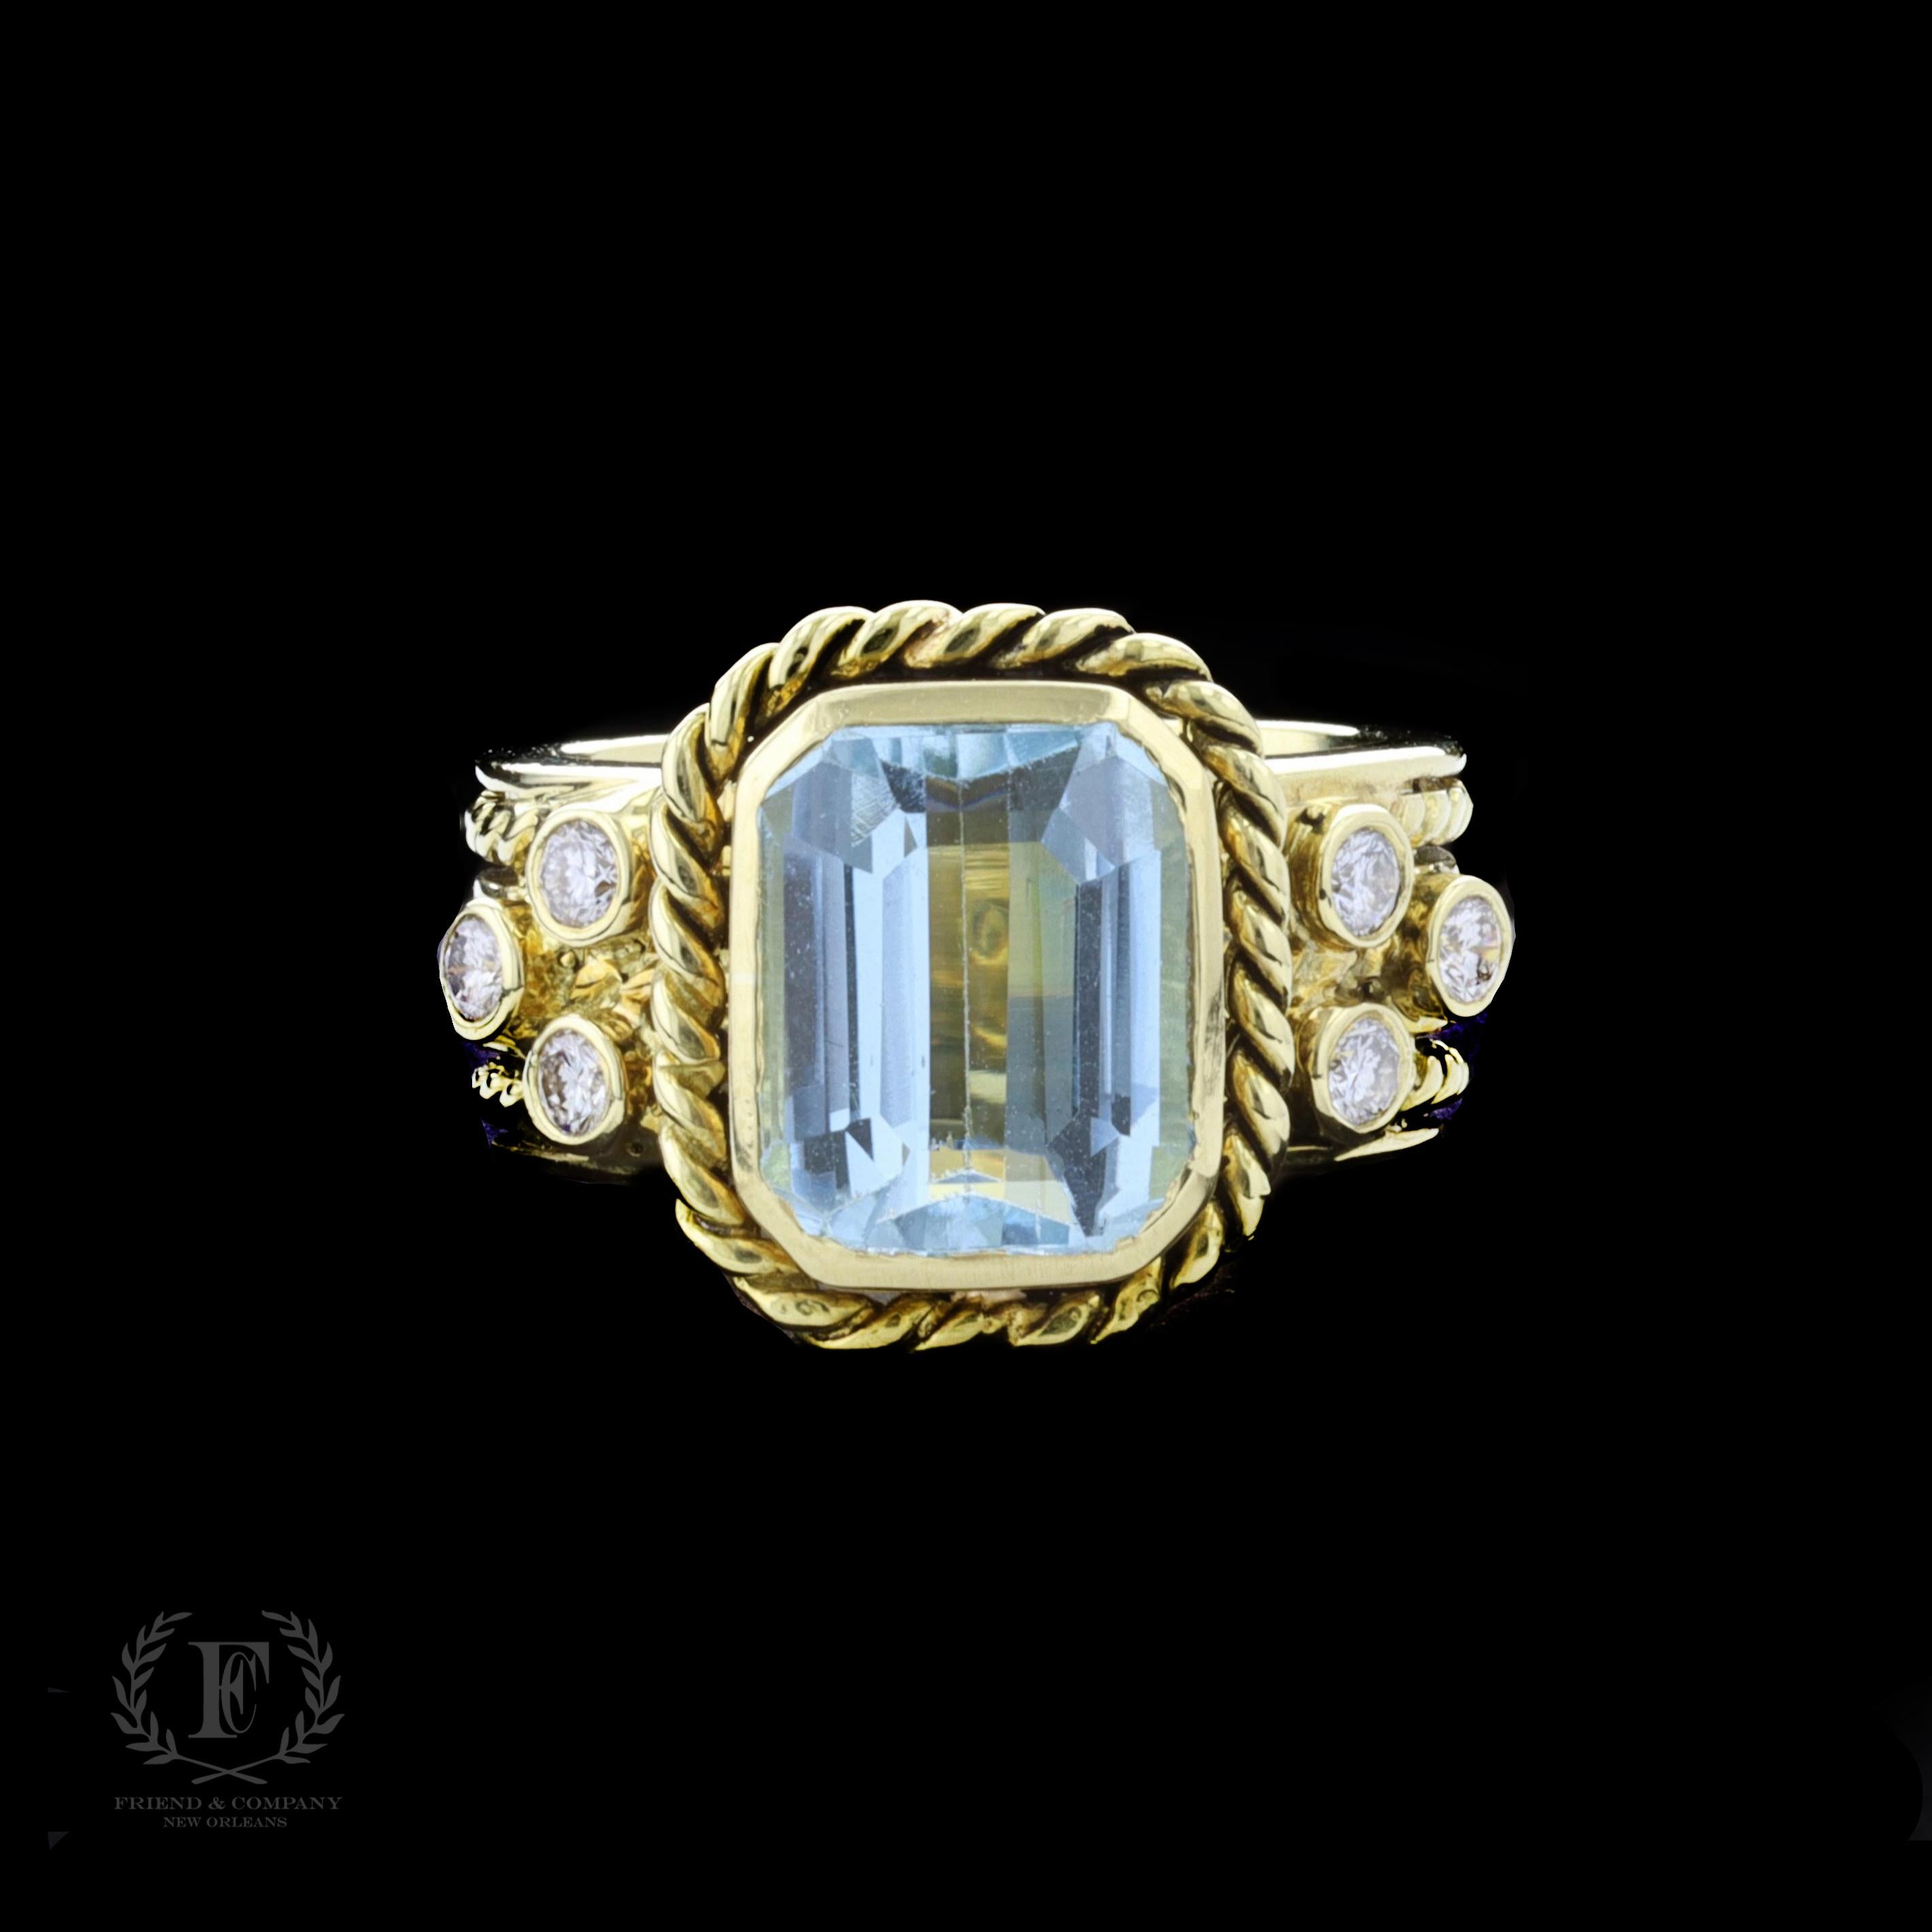 Add a treasure to your jewelry collection with this incredibly unique 18 karat yellow gold blue topaz and diamond ring. In the center of the ring is one emerald cut blue topaz and six round cut diamonds 0.25 carats total. The ring is sized to a 4.